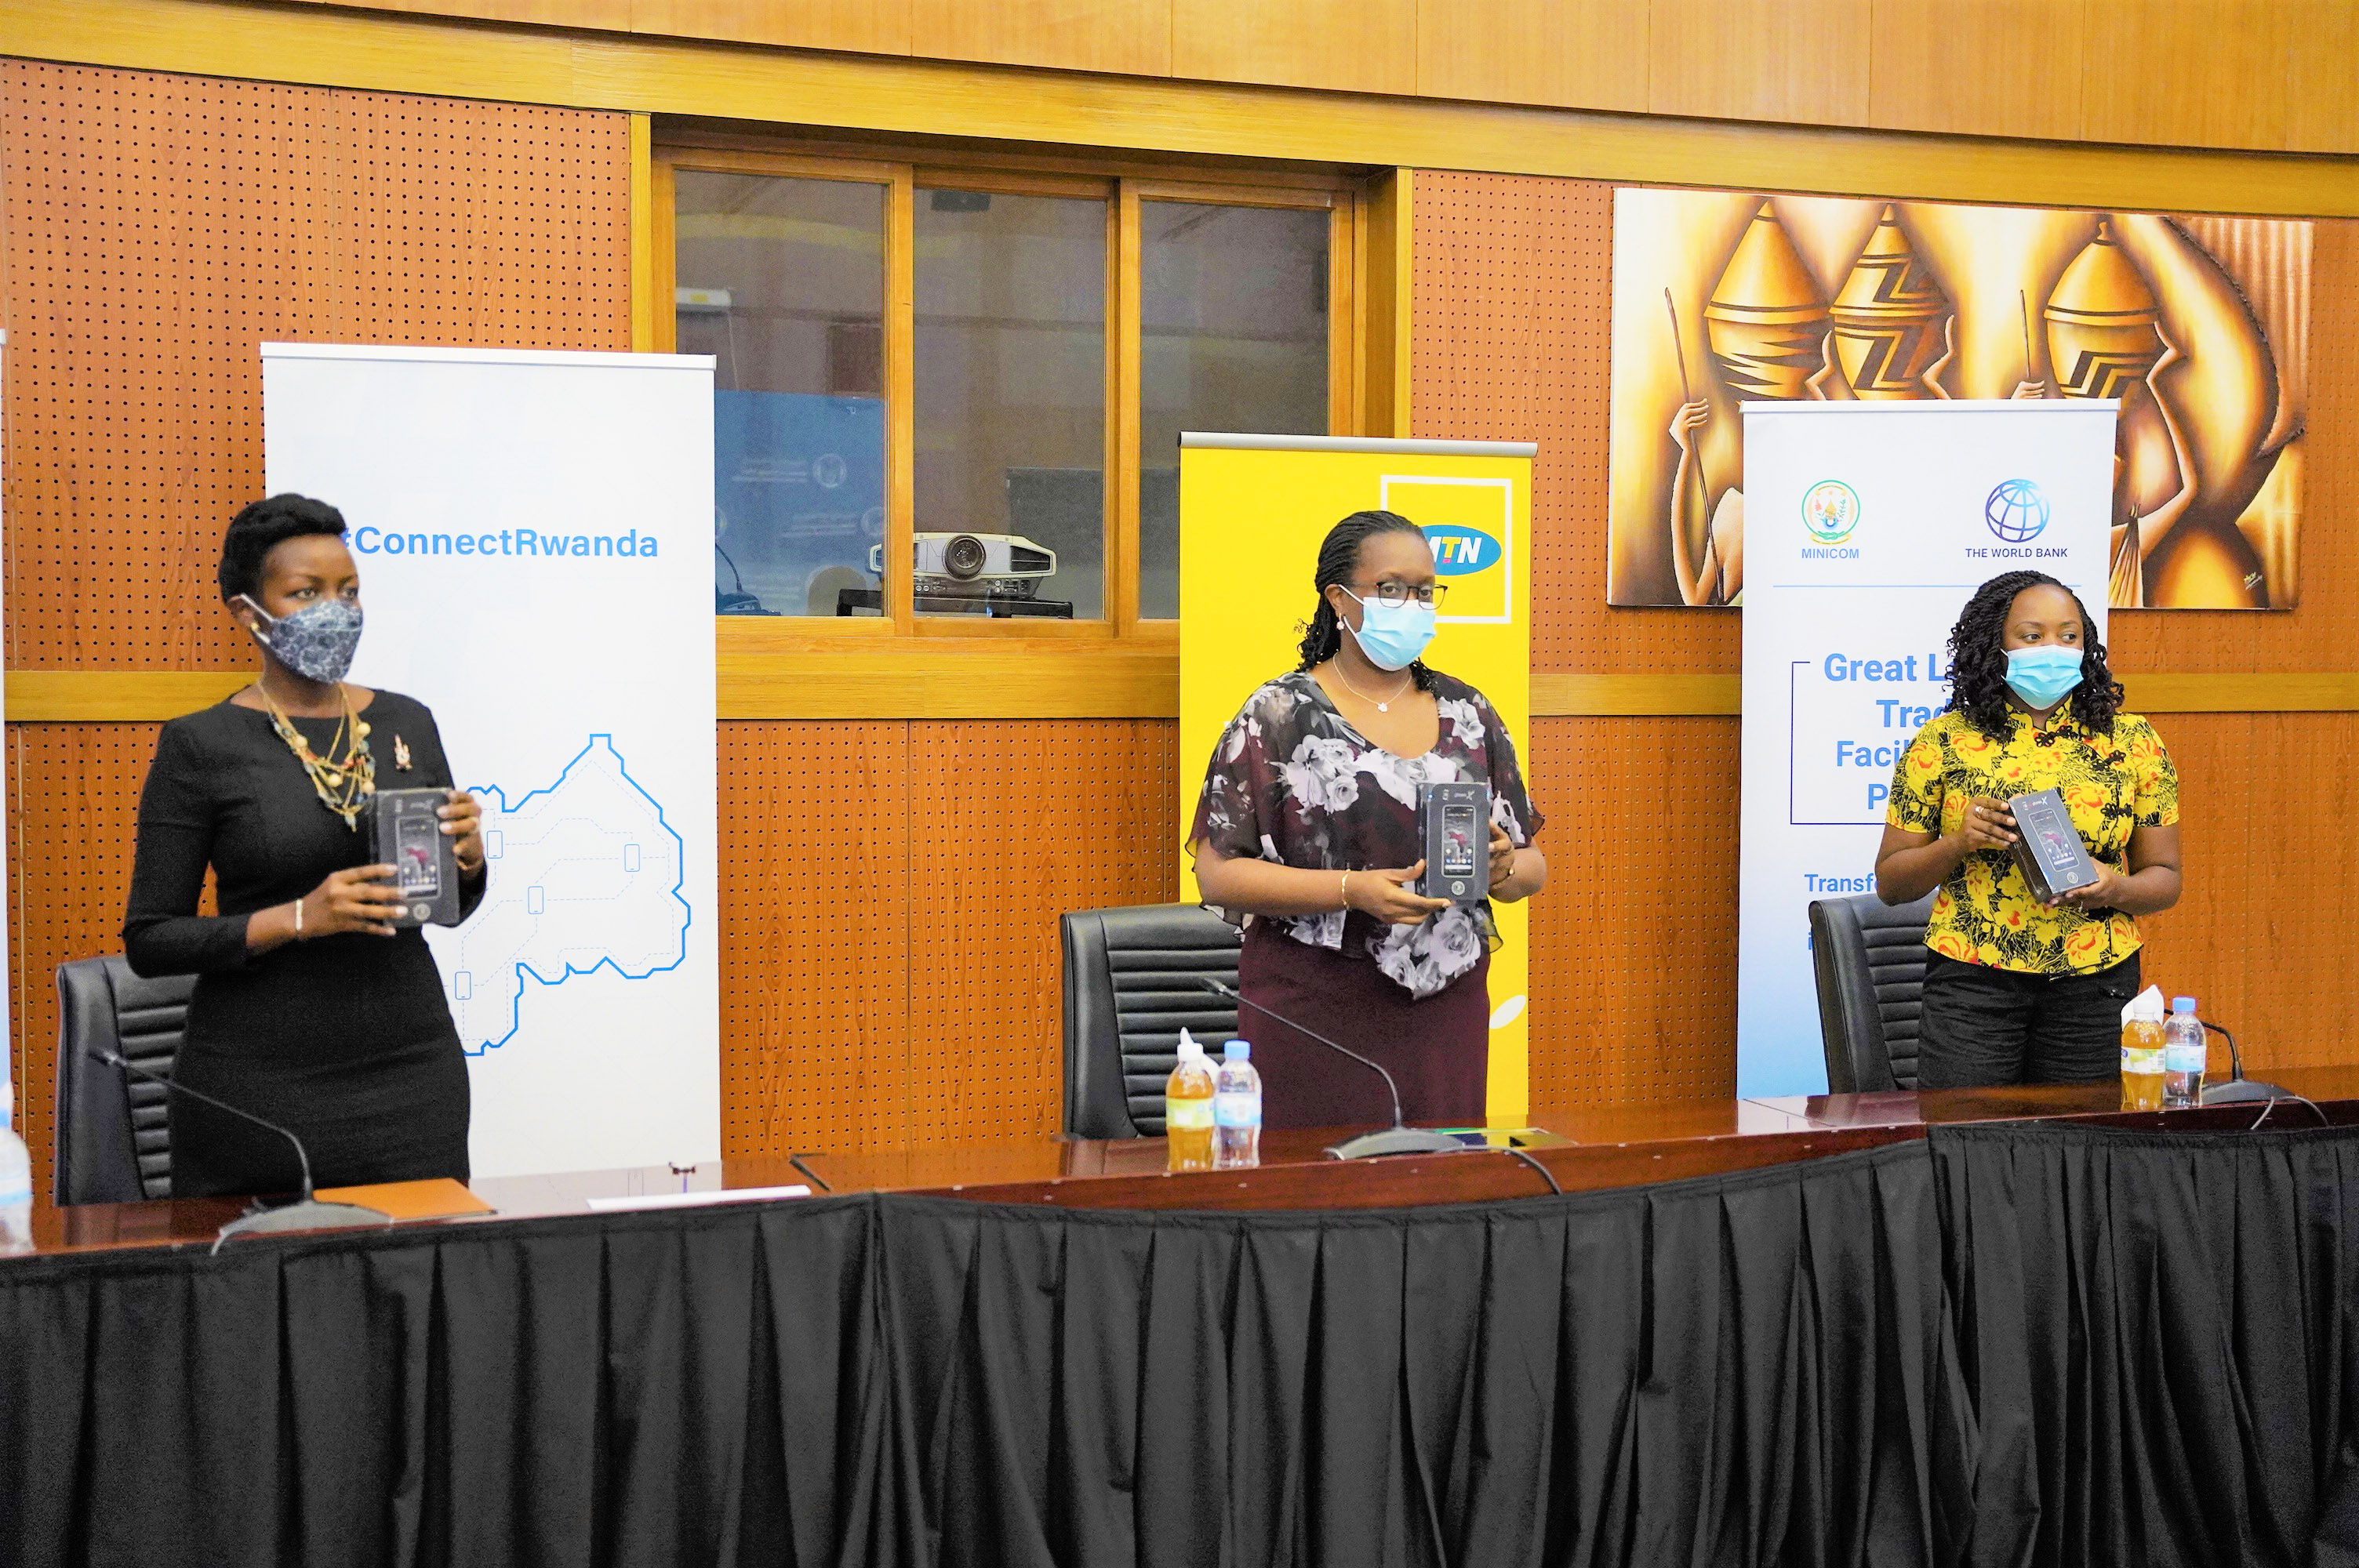 (L-R) Minister of ICT, Paula Ingabire, Beata Habyarimana, the Minister of Trade and Industry and MTN Rwanda CEO Mitwa Ngu2019ambi during the handover of smartphones to be distributed to residents on February 10. 